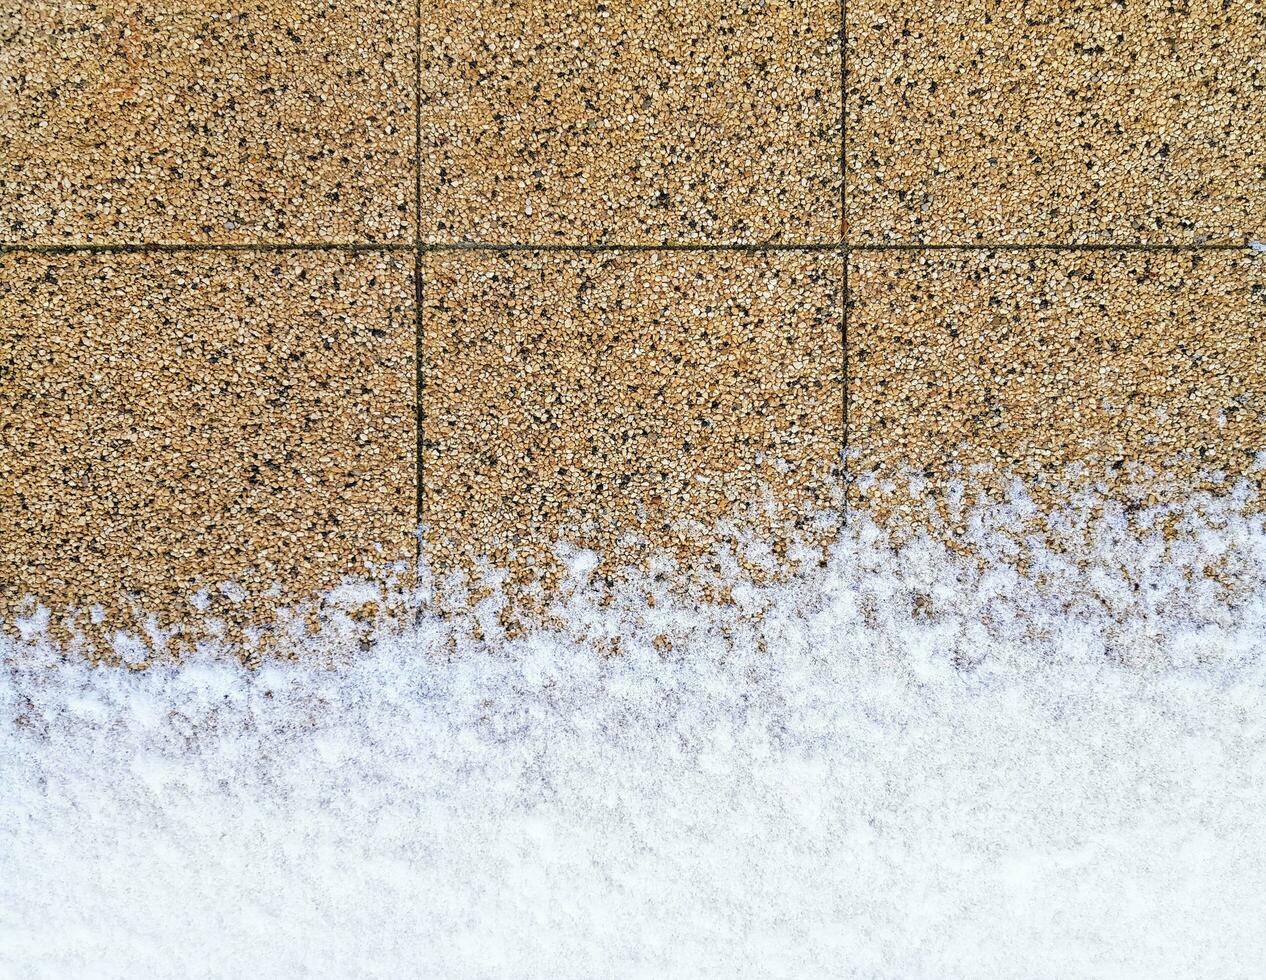 Sidewalk partially covered with snow at the bottom. Paving slabs made of very small pebbles, brown and beige. Pavement horizontal background. Place for your text here photo